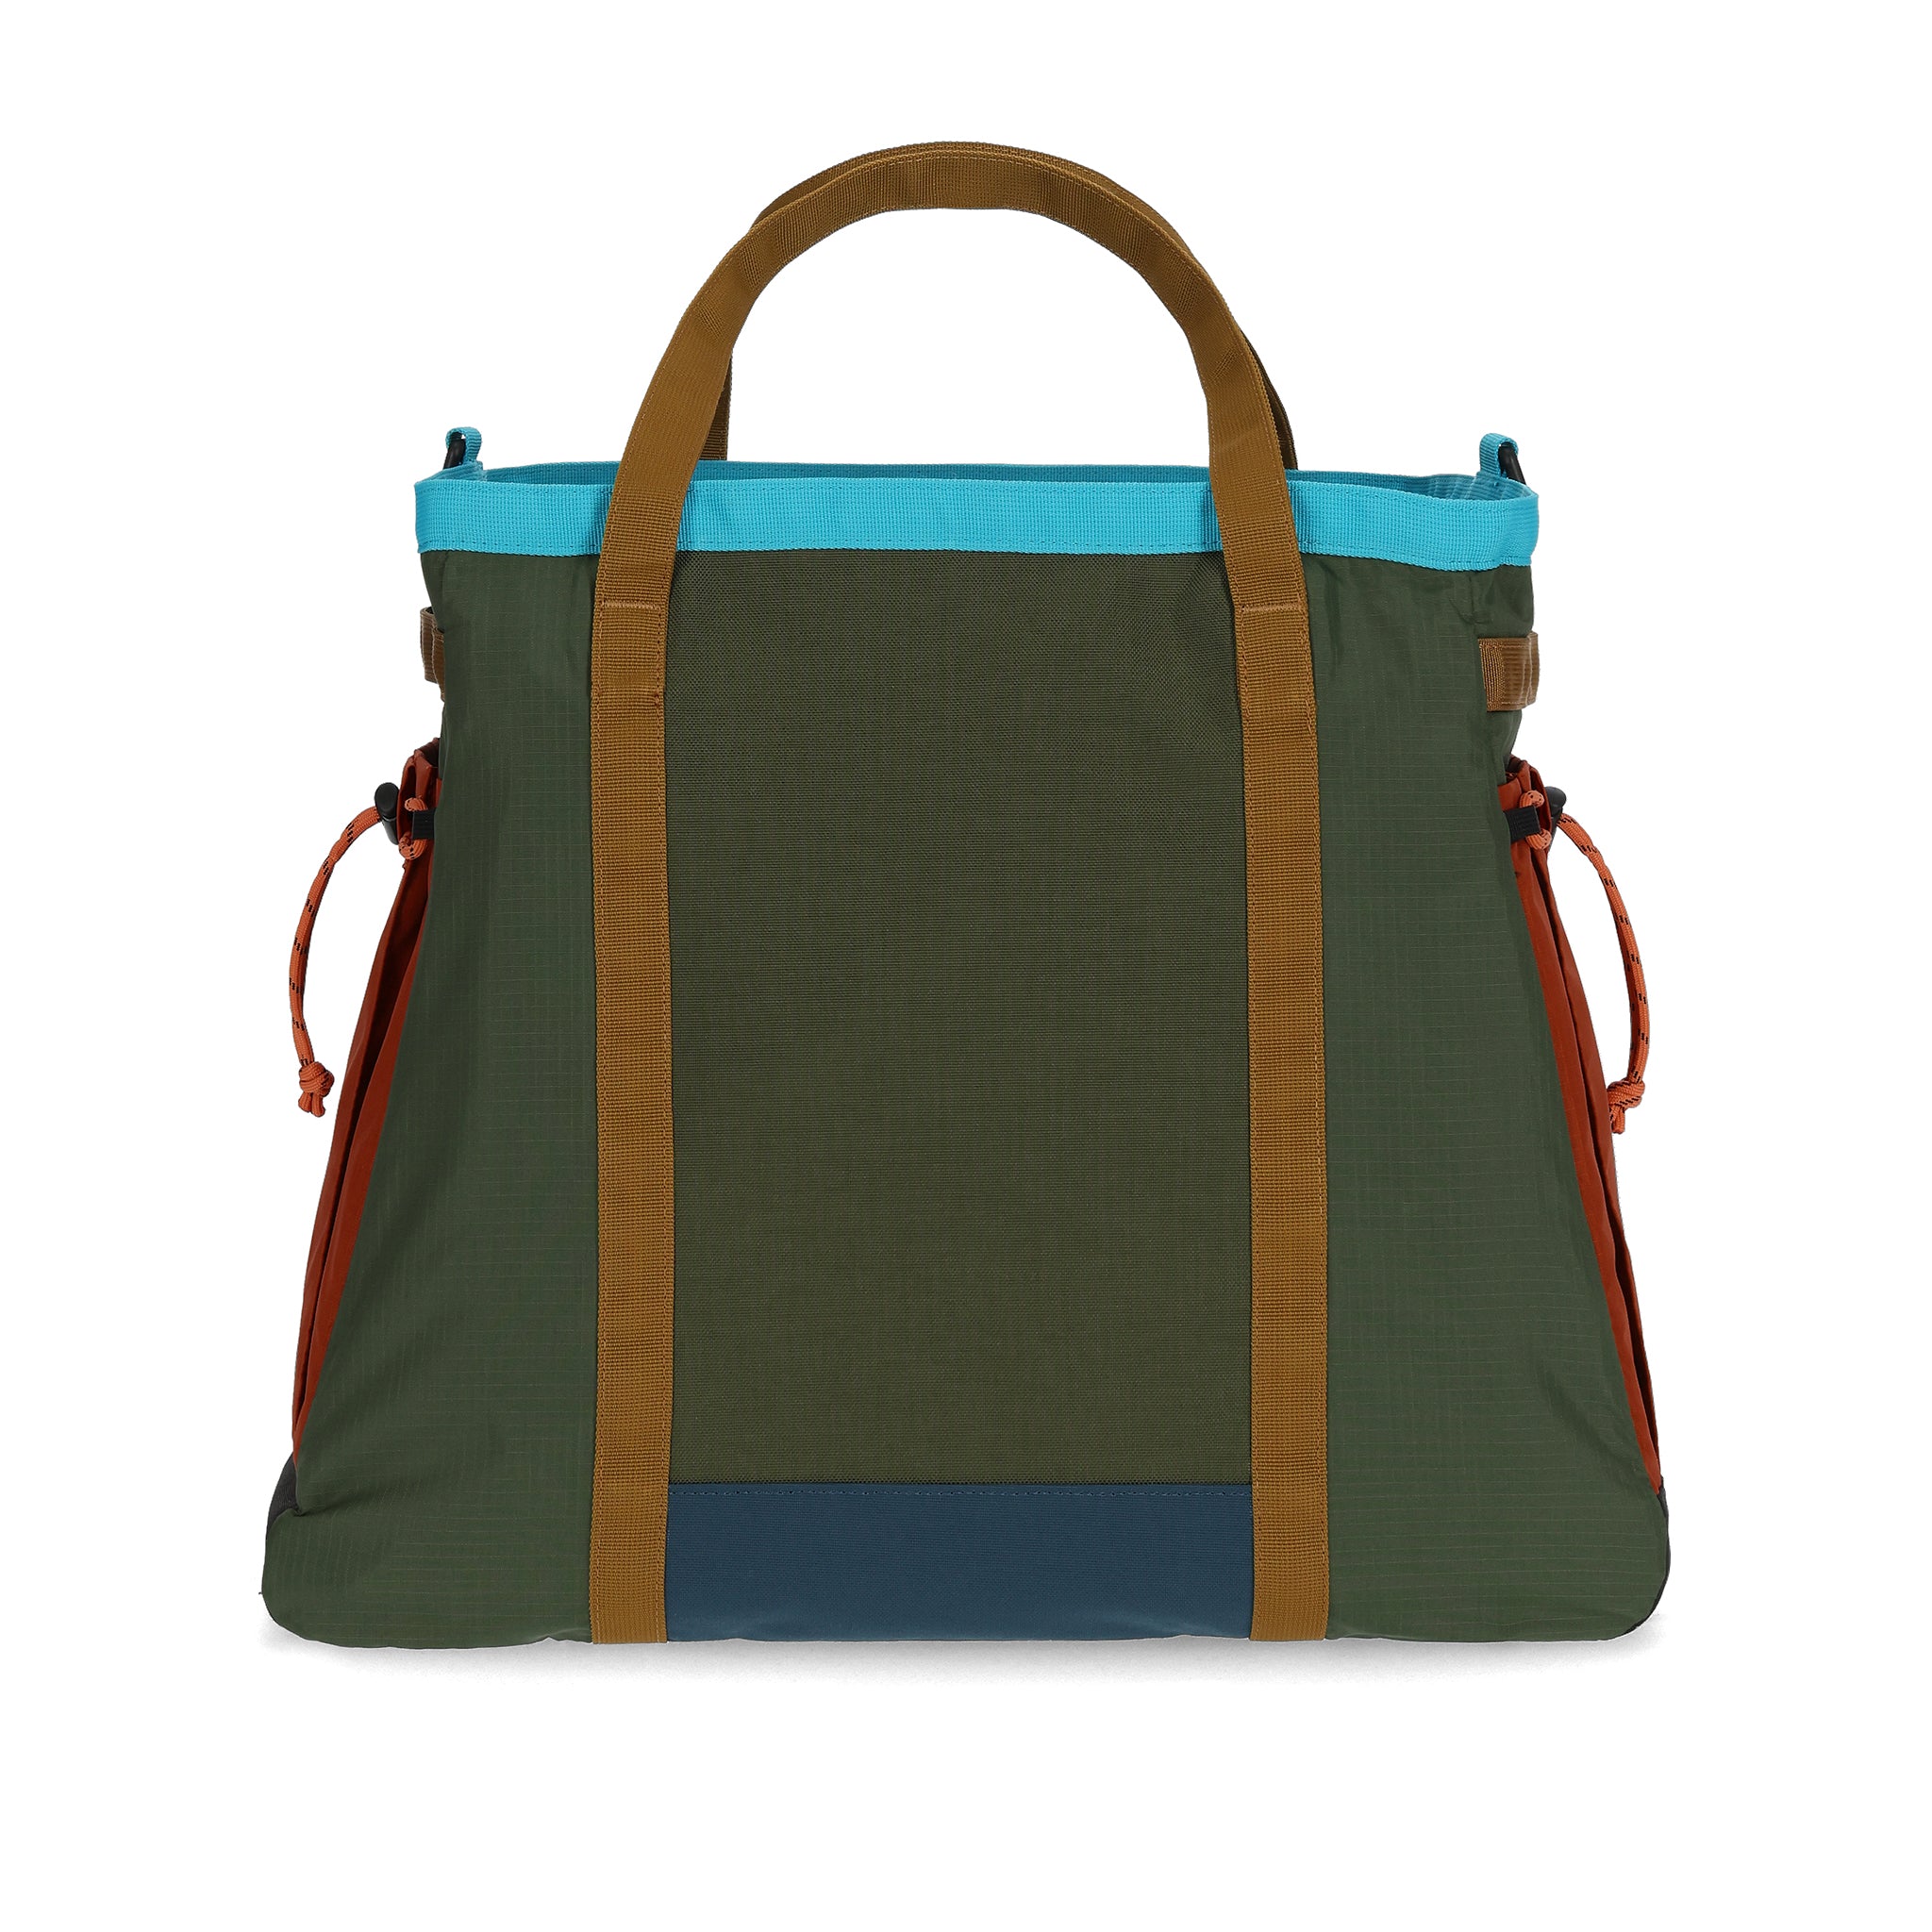 Back View of Topo Designs Mountain Gear Bag in "Olive / Hemp"